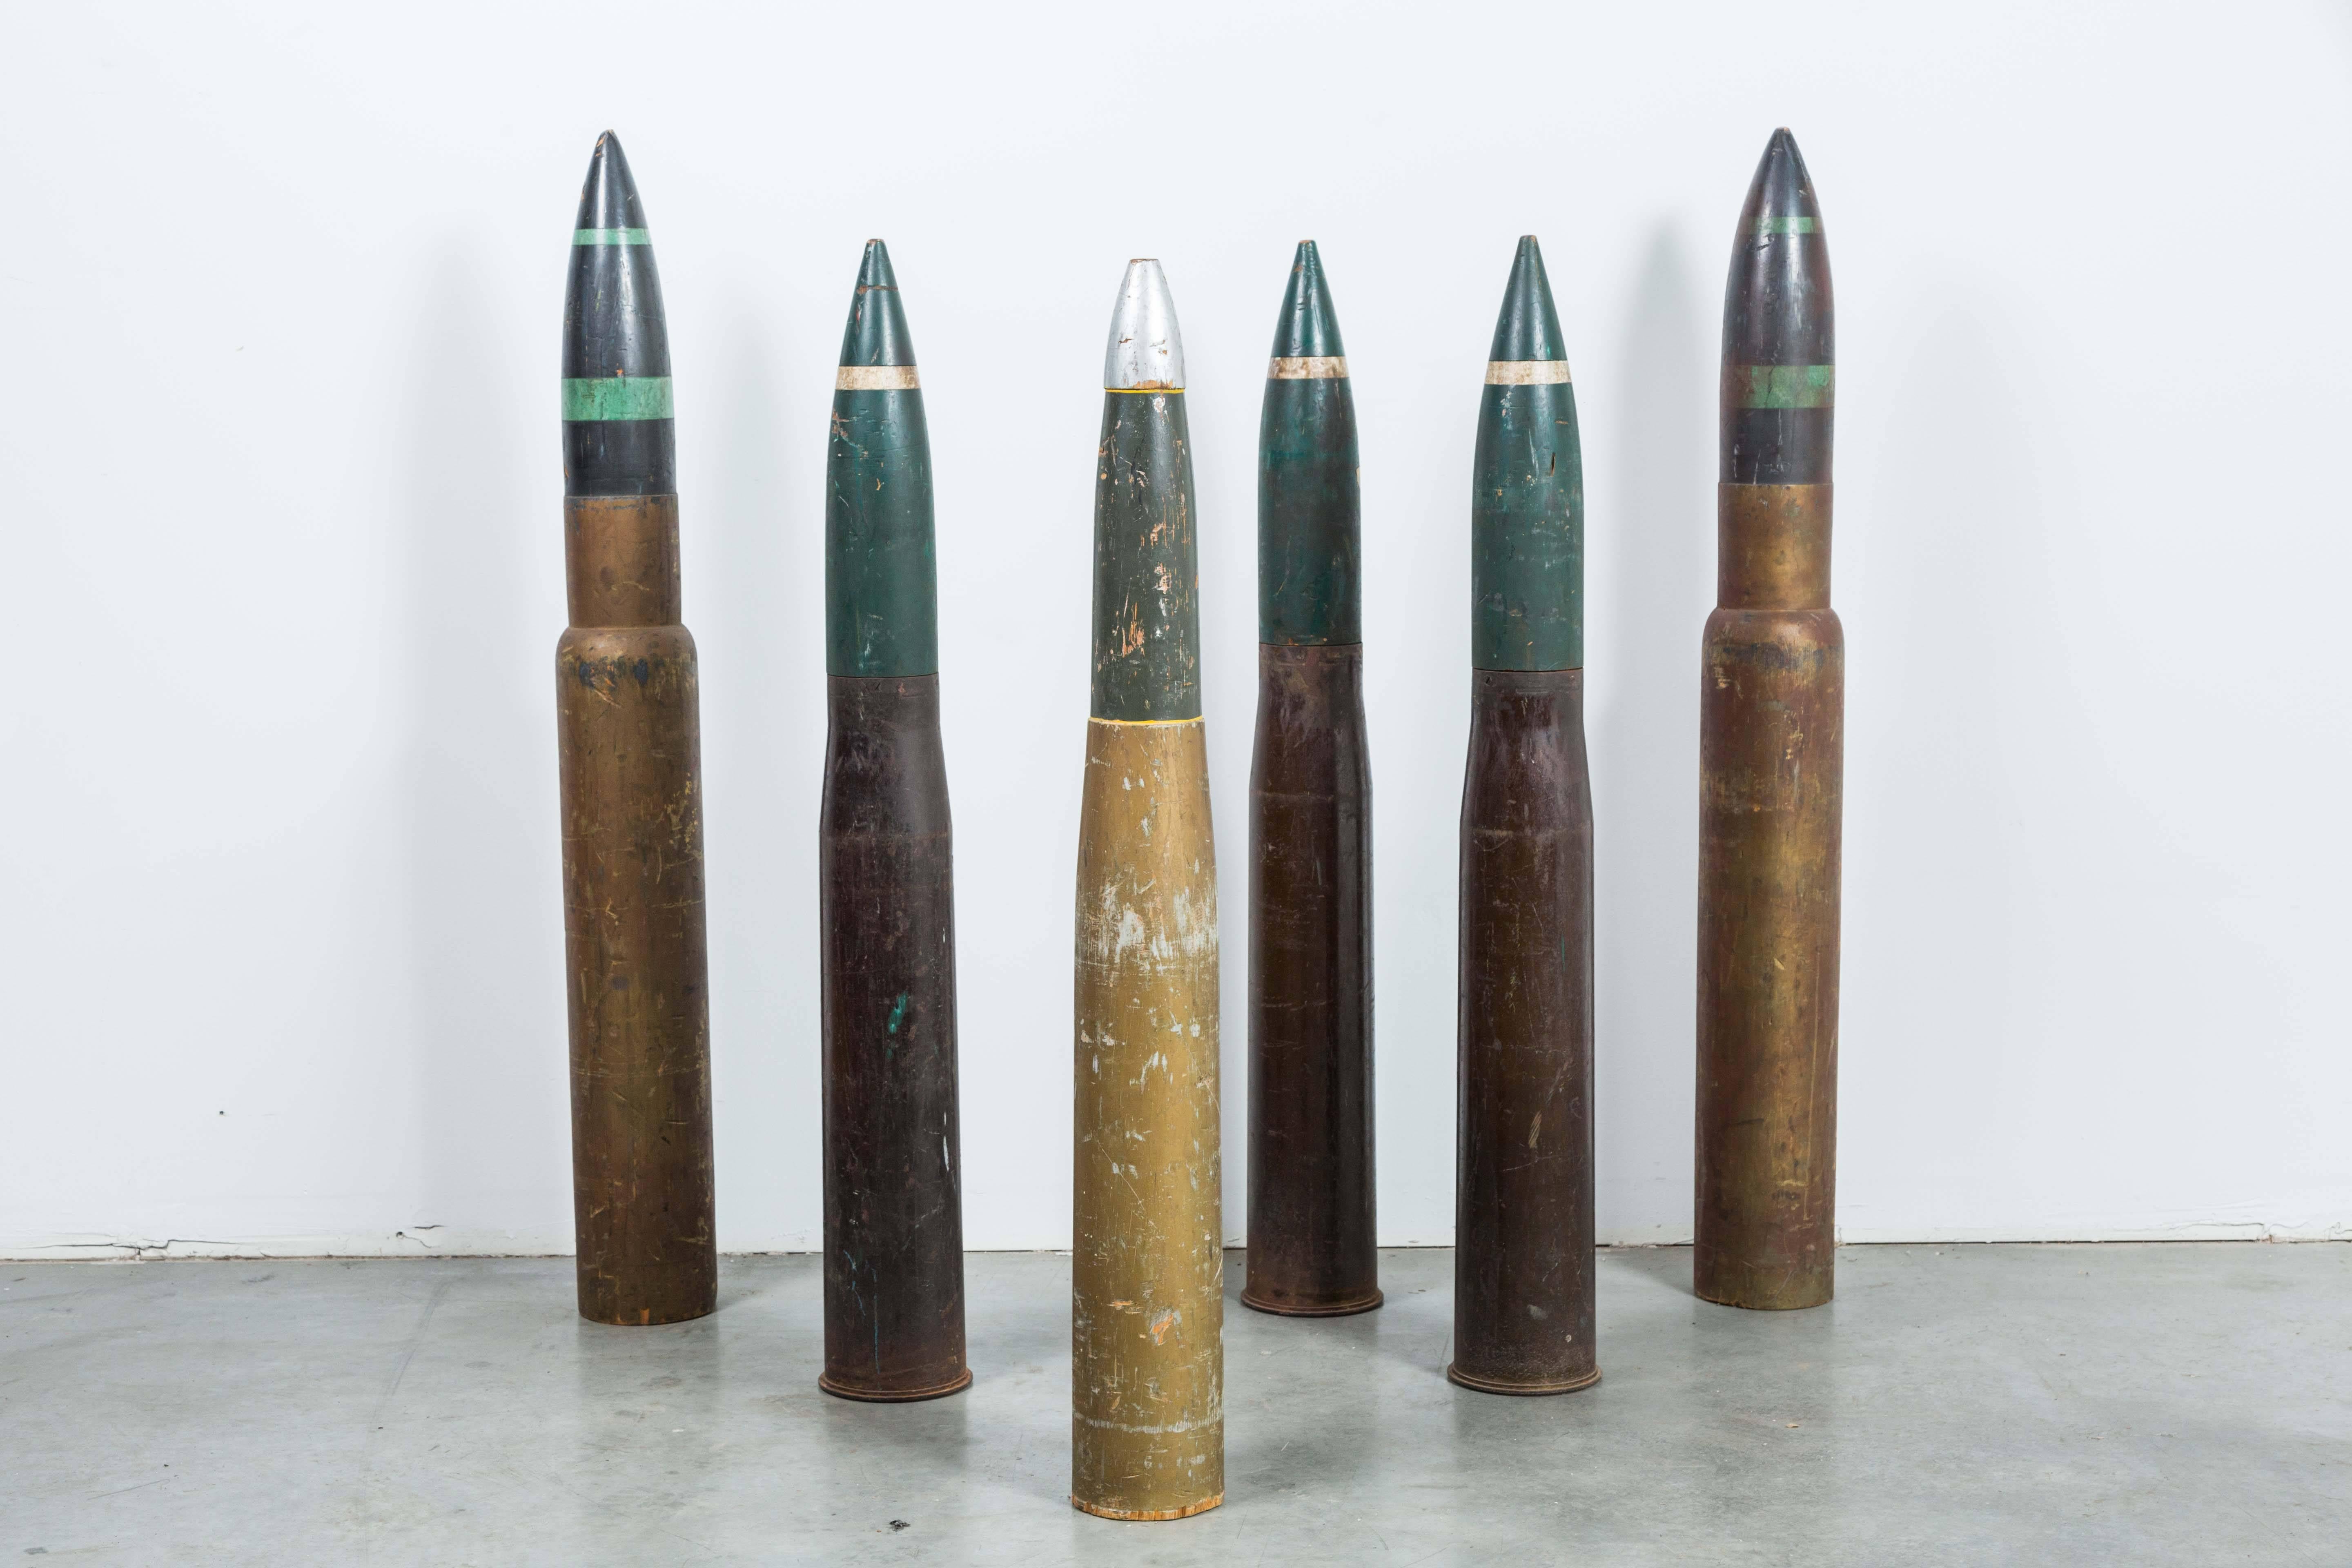 Collection of six wood and iron practice artillery shells found in the California desert. Three of the six have full-metal jacket casings, in which a legible portion ont he bottom of each reads "FOR GUNS M36 M54 M41," "ART